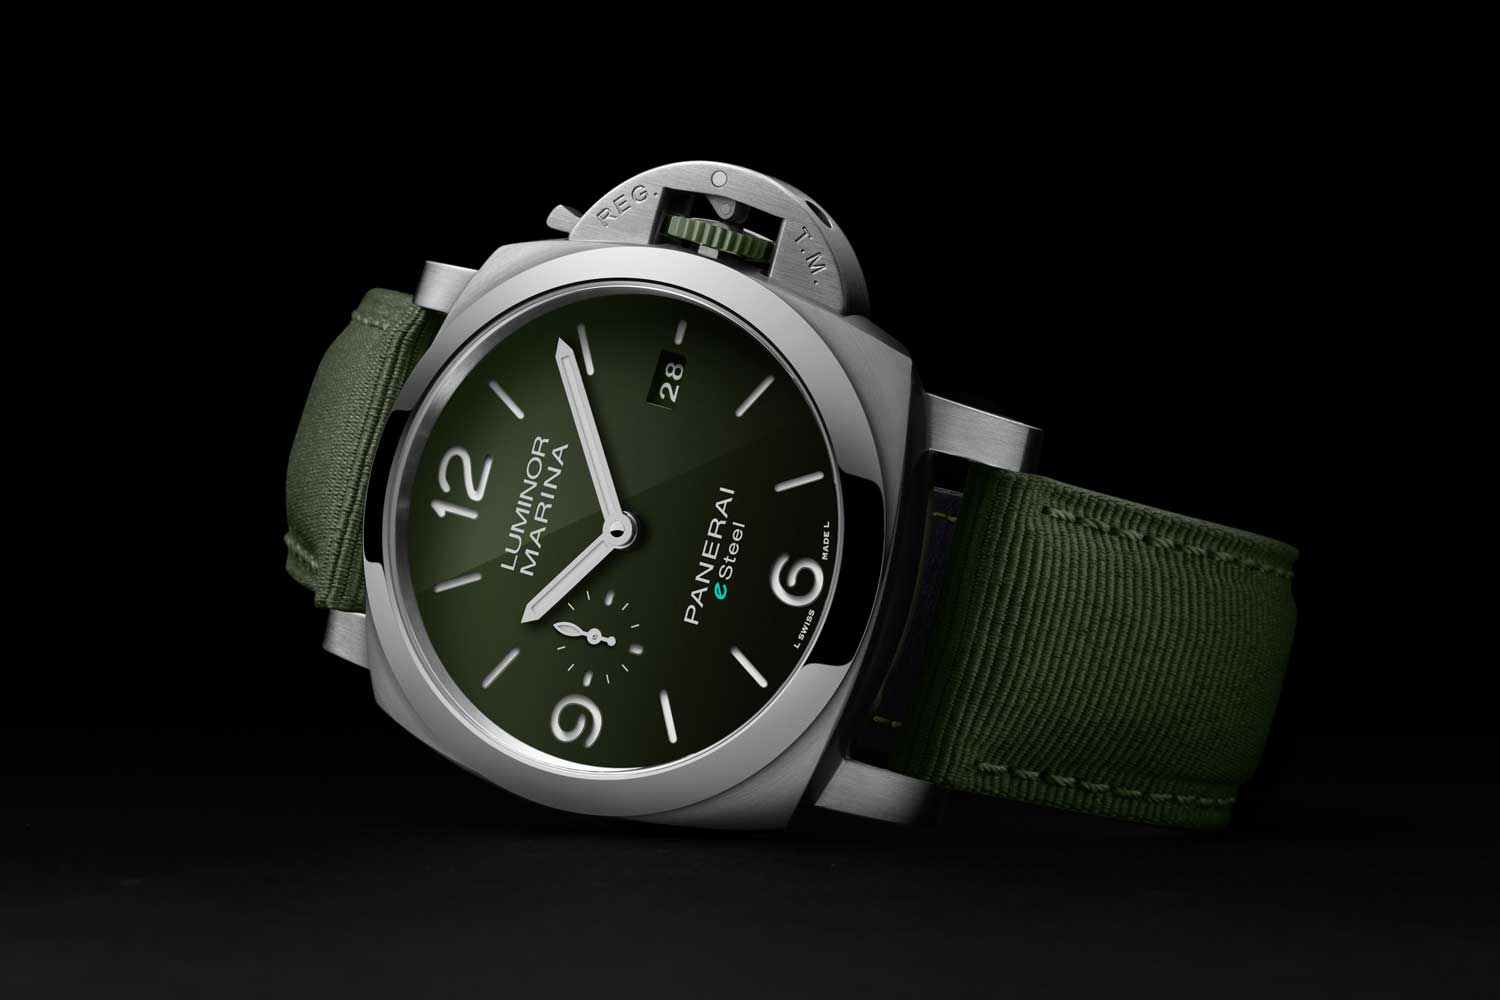 The Luminor Marina eSteel uses a recycled-based steel alloy to make its cases and dials.